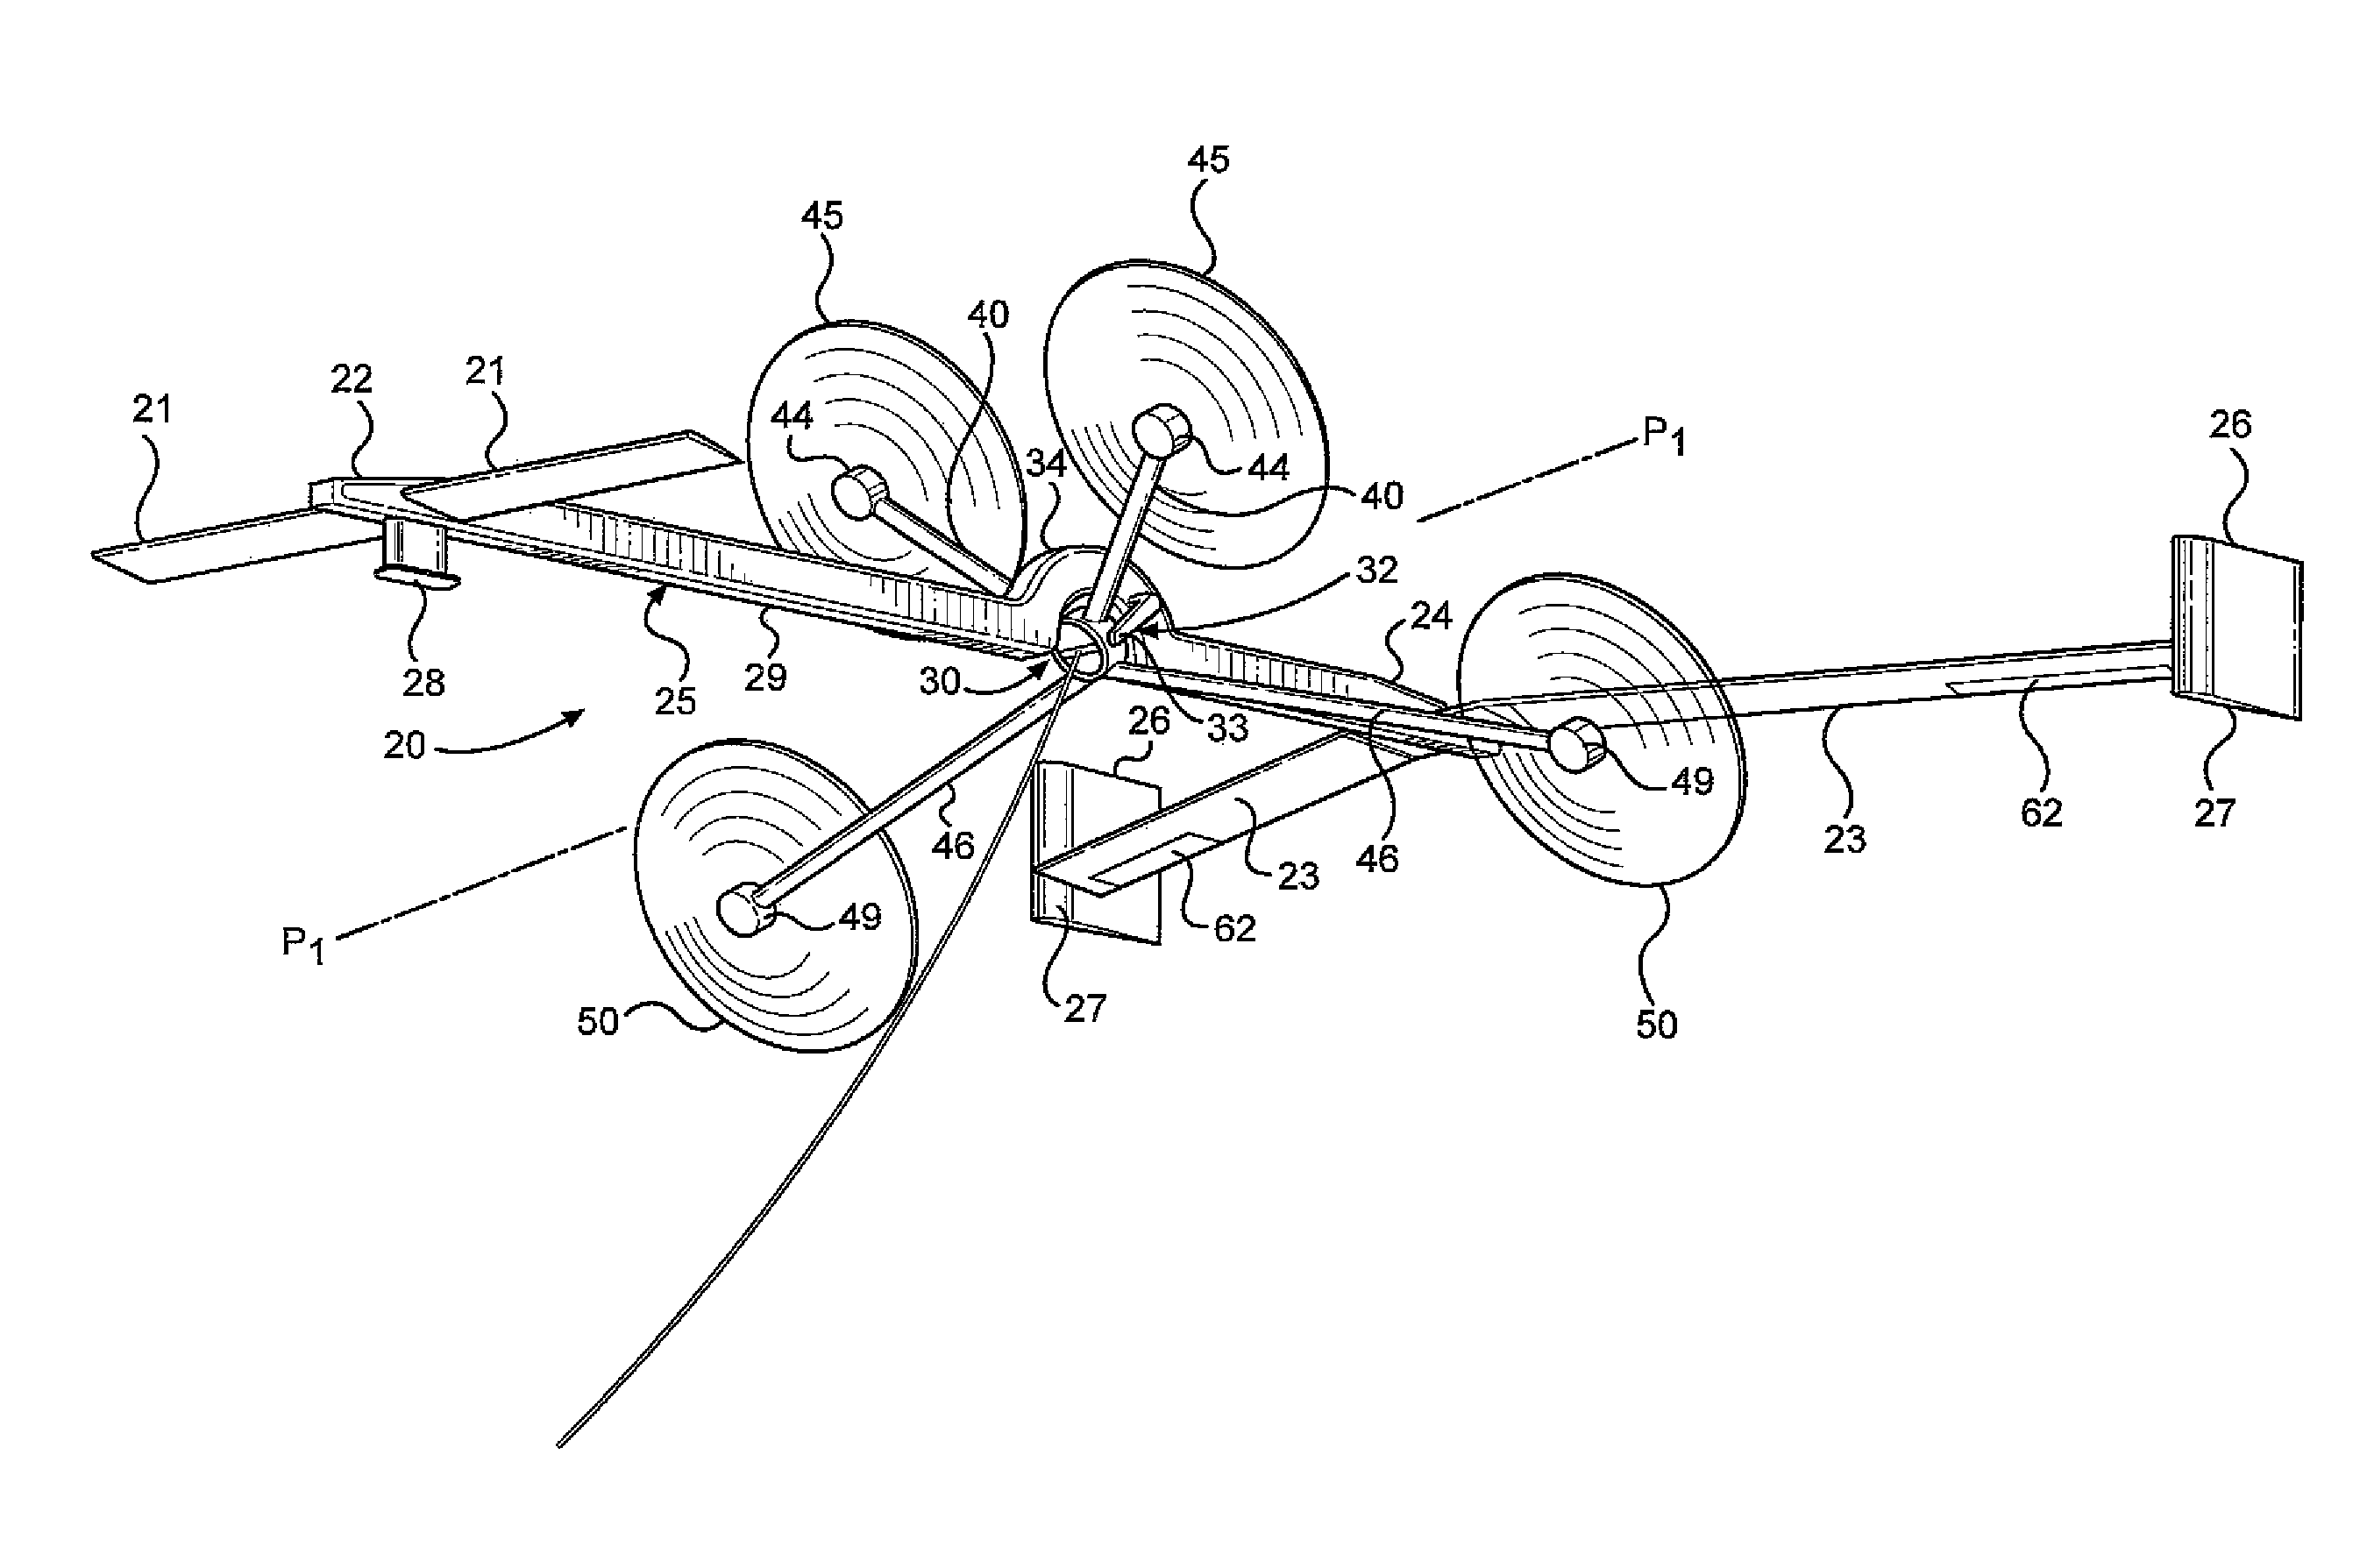 Auto-gyro rotor flying electric generator (FEG) with wing lift augmentation